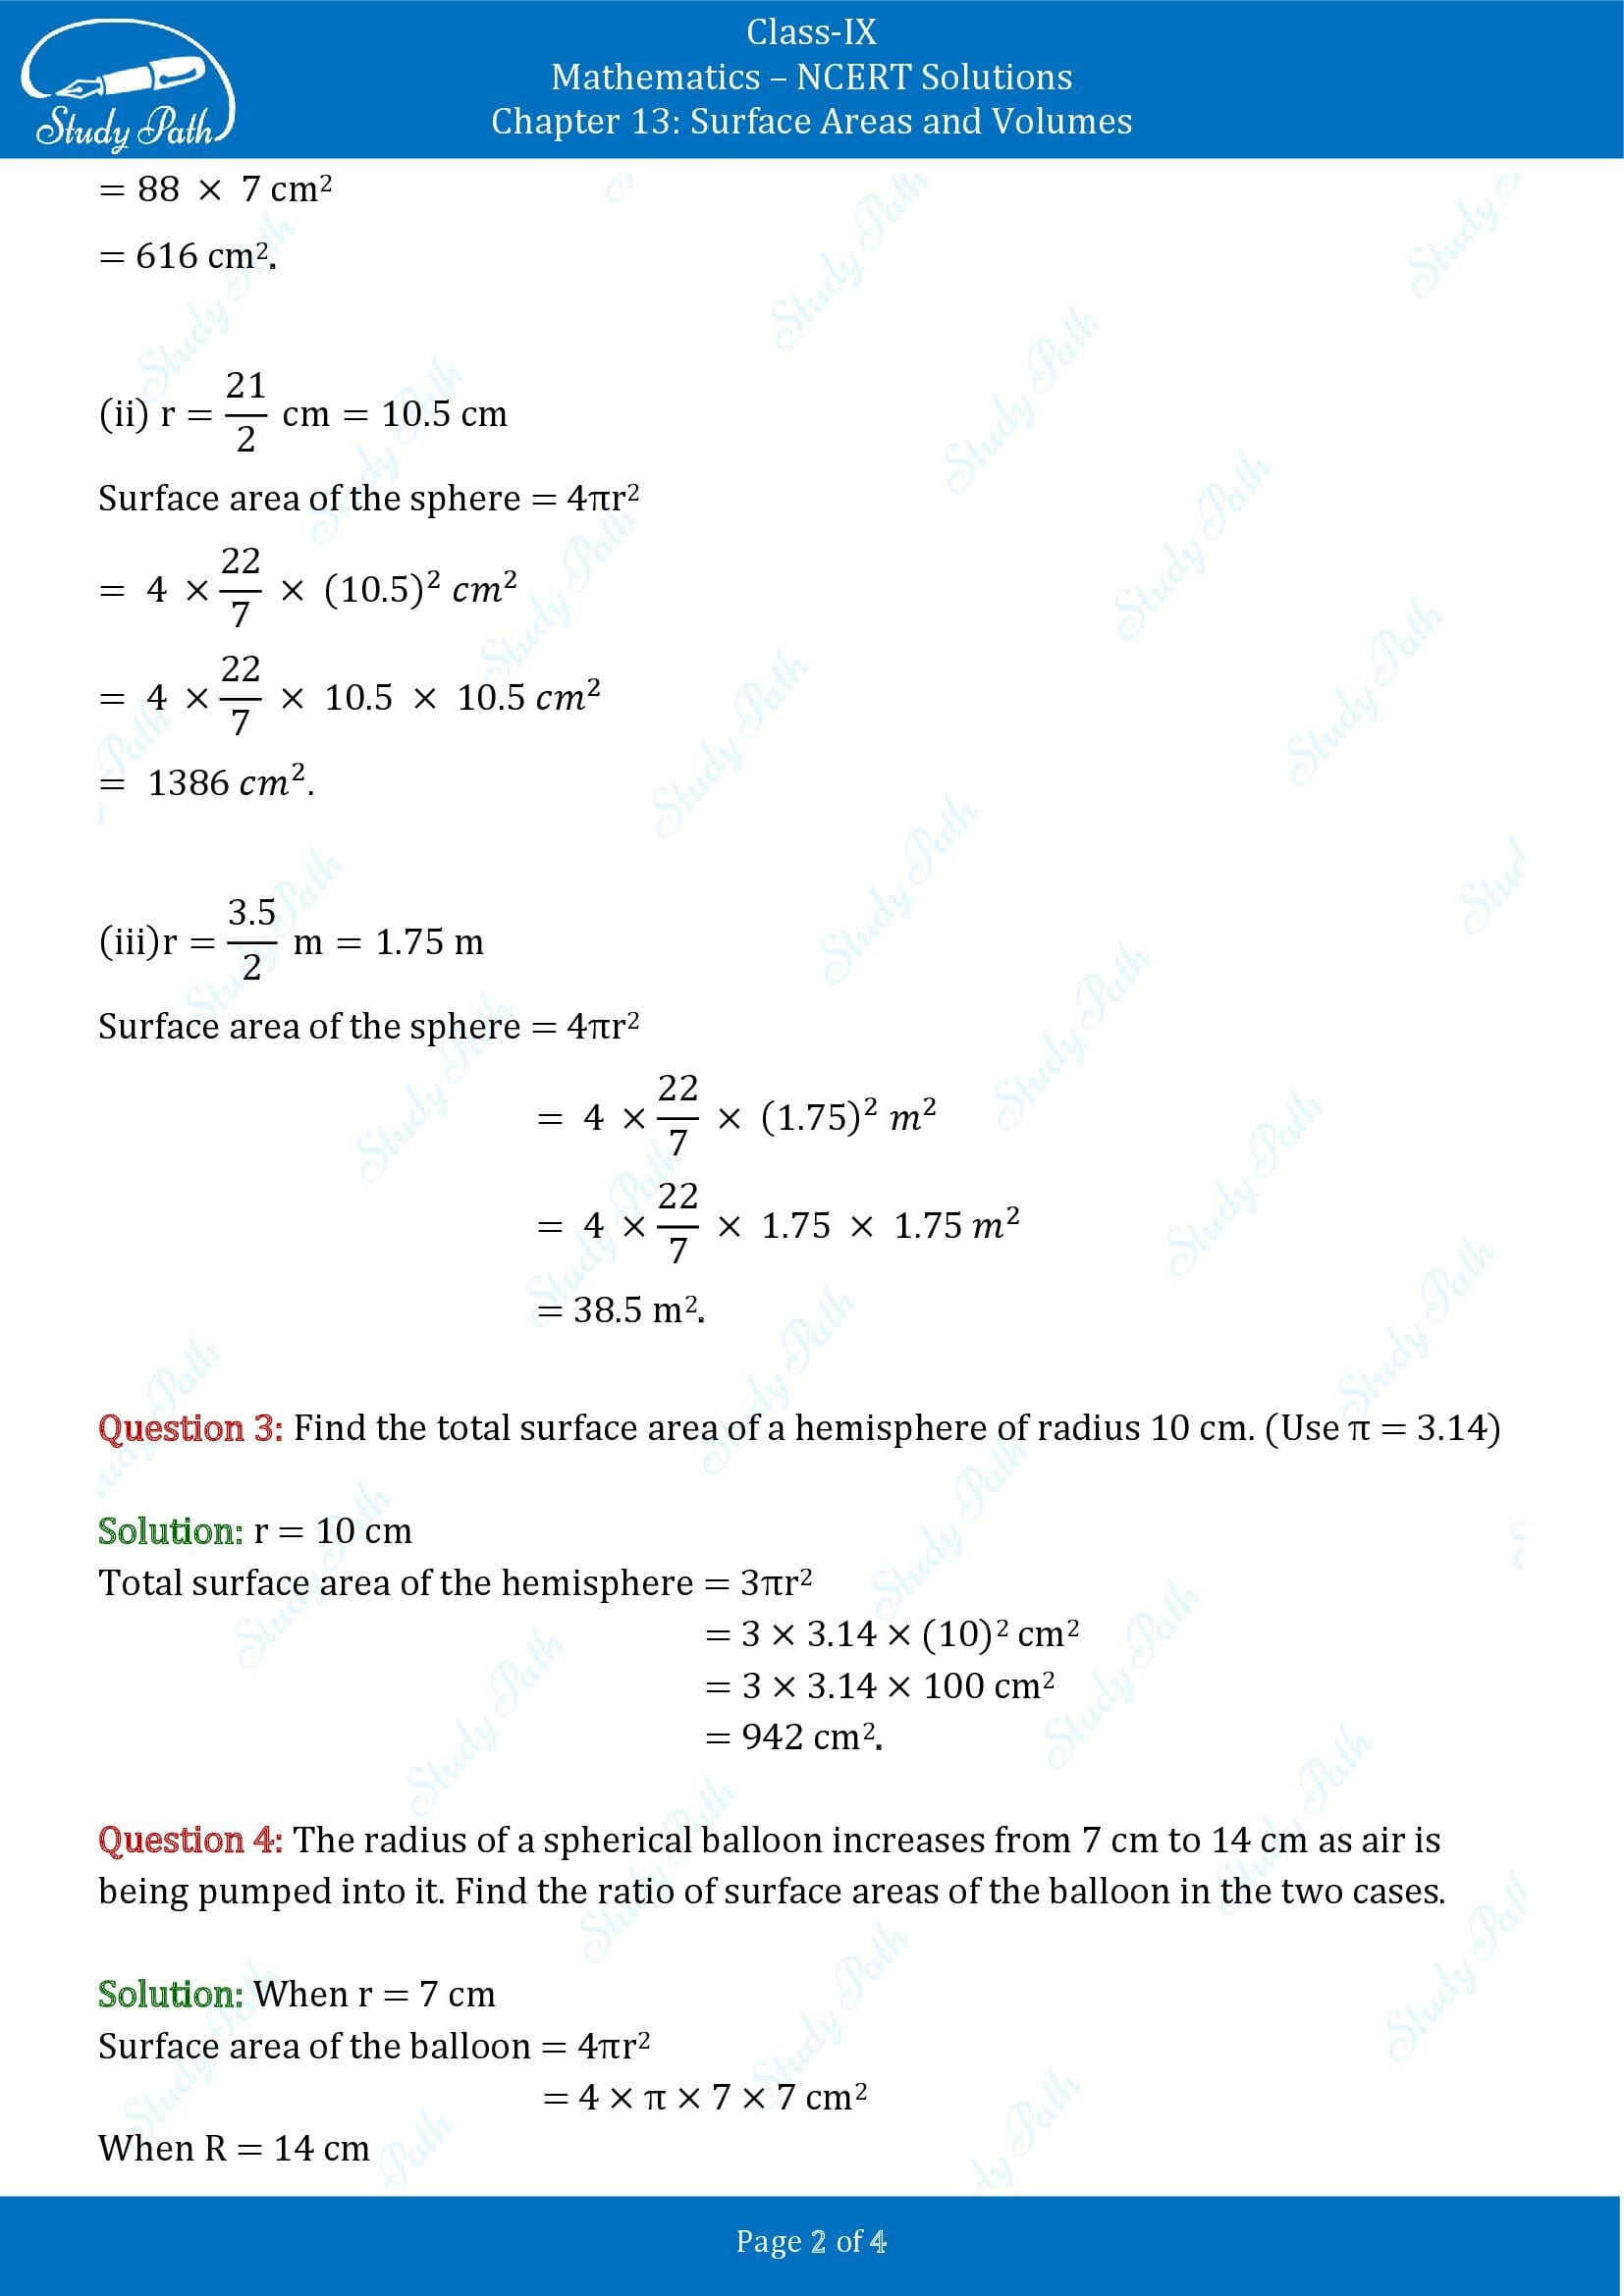 NCERT Solutions for Class 9 Maths Chapter 13 Surface Areas and Volumes Exercise 13.4 00002